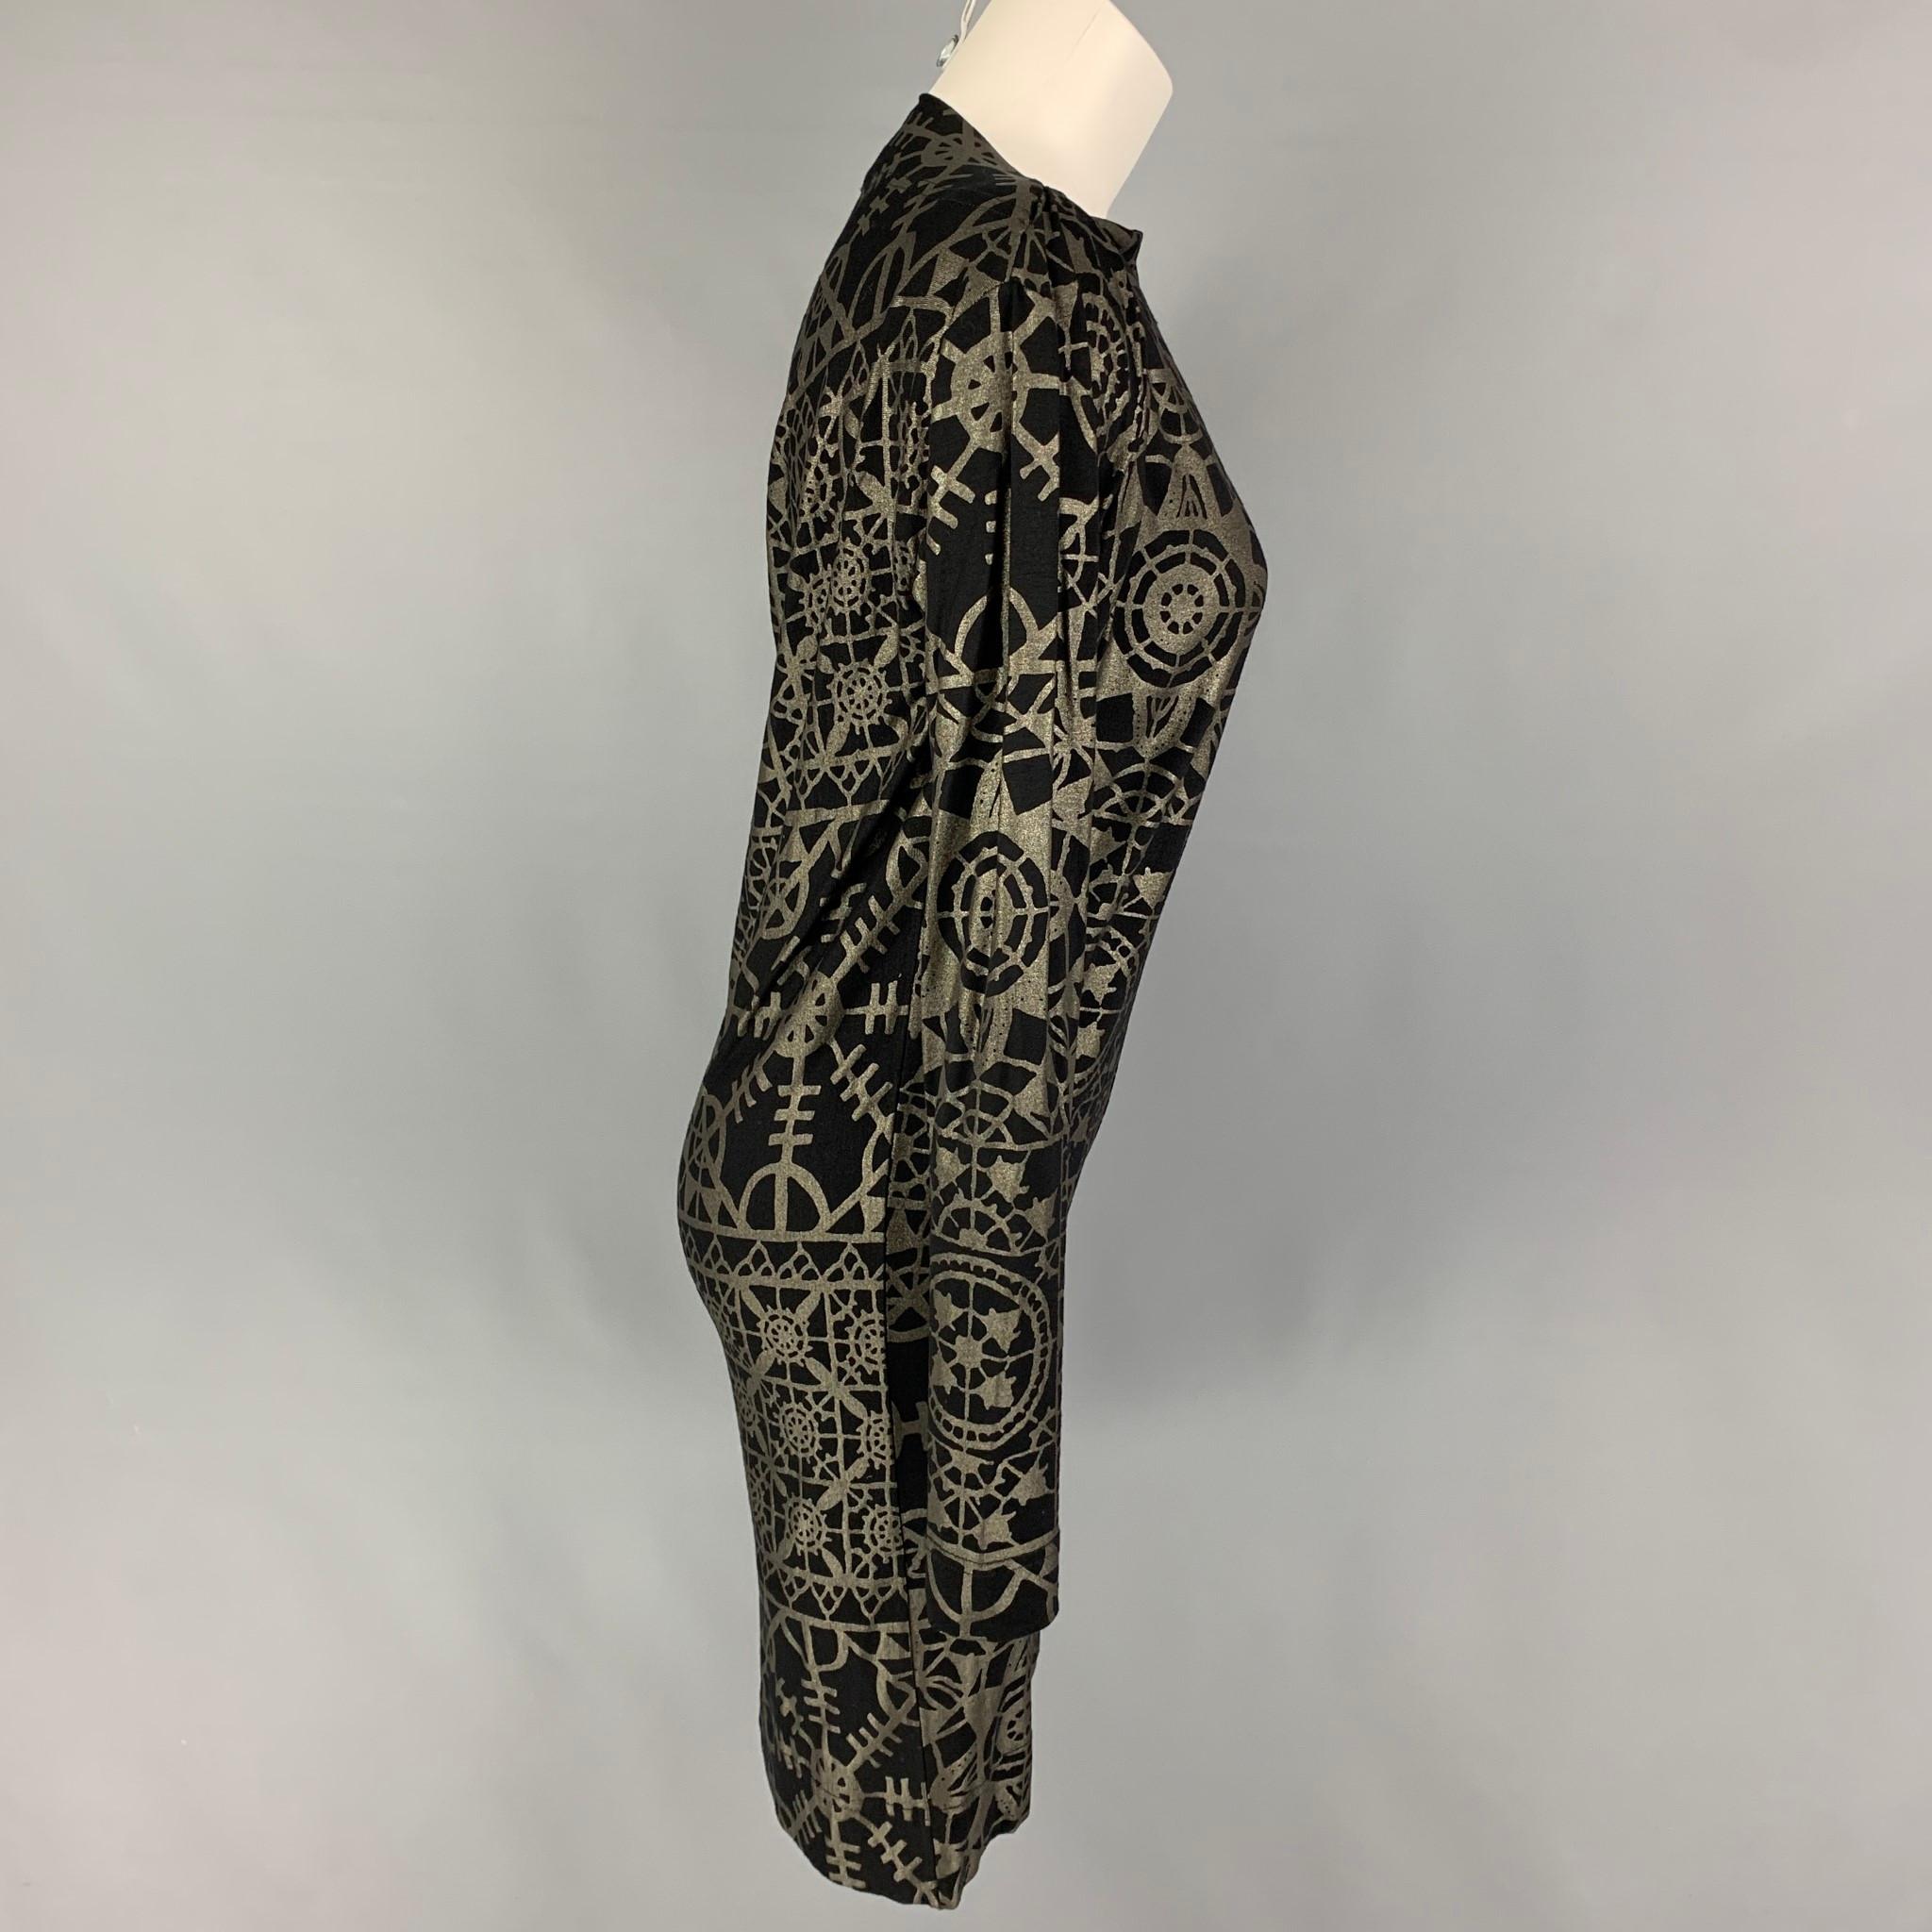 VIVIENNE WESTWOOD ANGLOMANIA dress comes in a black & silver abstract viscose blend featuring a ruched side detail, long sleeves, and a mock neckline. 

Very Good Pre-Owned Condition.
Marked: S

Measurements:

Shoulder: 18 in.
Bust: 34 in.
Hip: 30